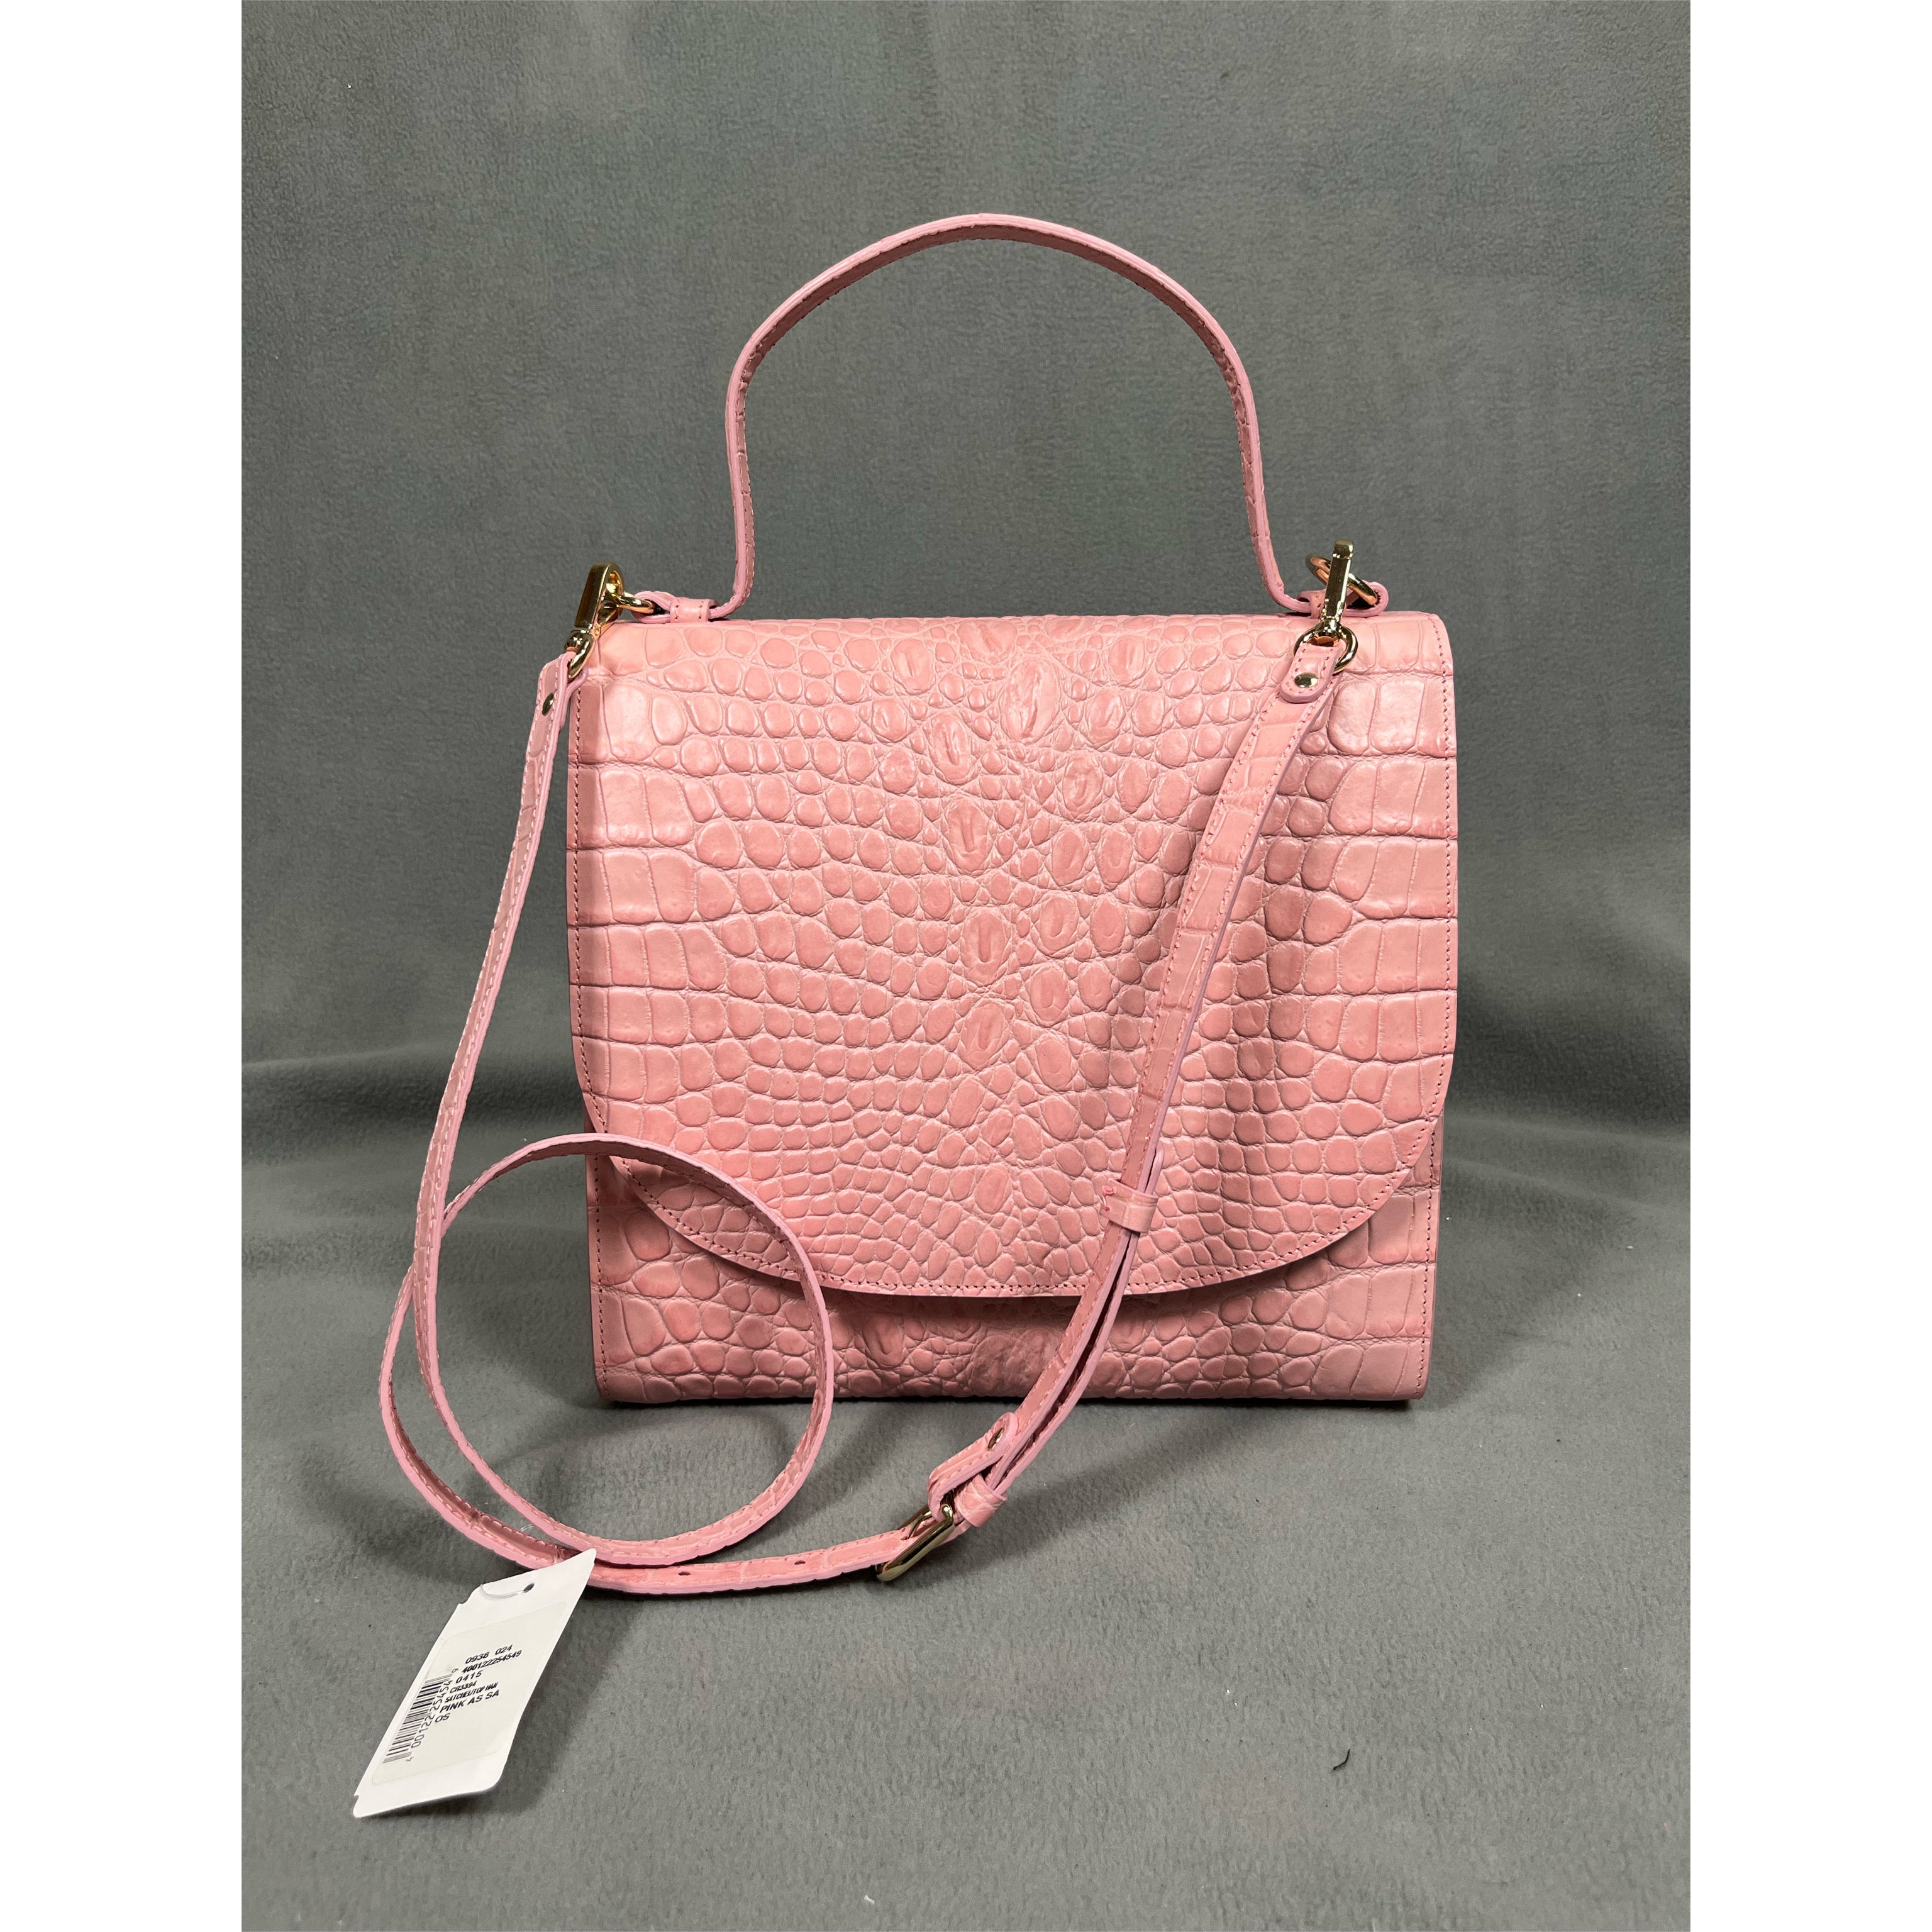 Saks Fifth Ave. pink embossed-leather bag, NEW WITH TAGS!